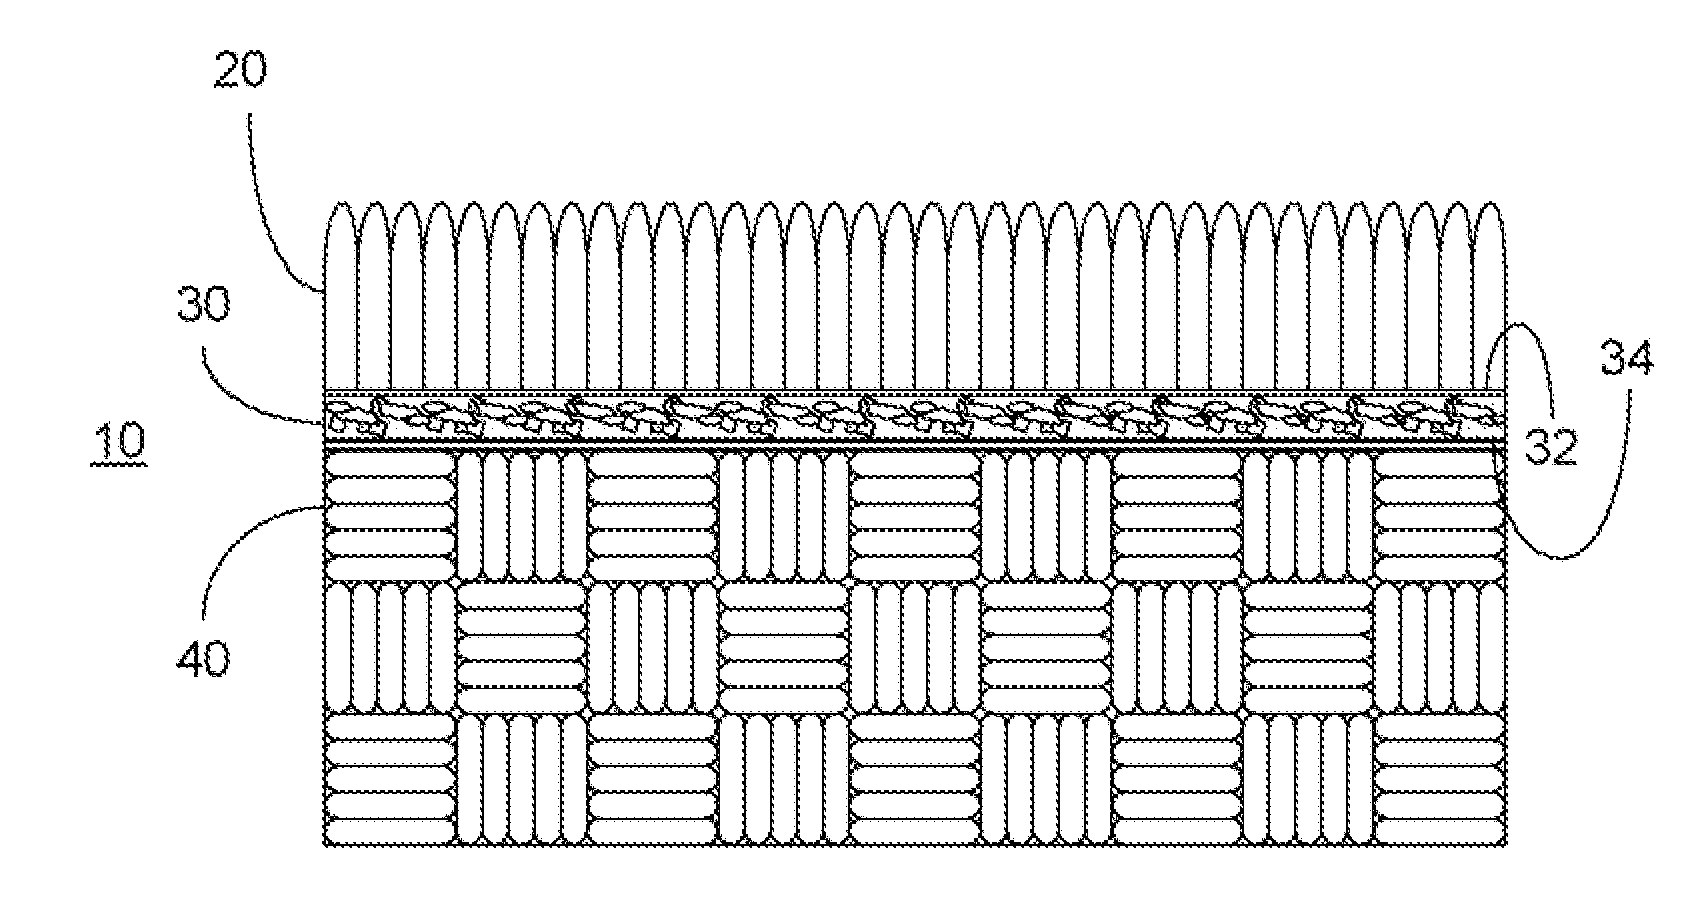 Synthetic drainage and impact attenuation system